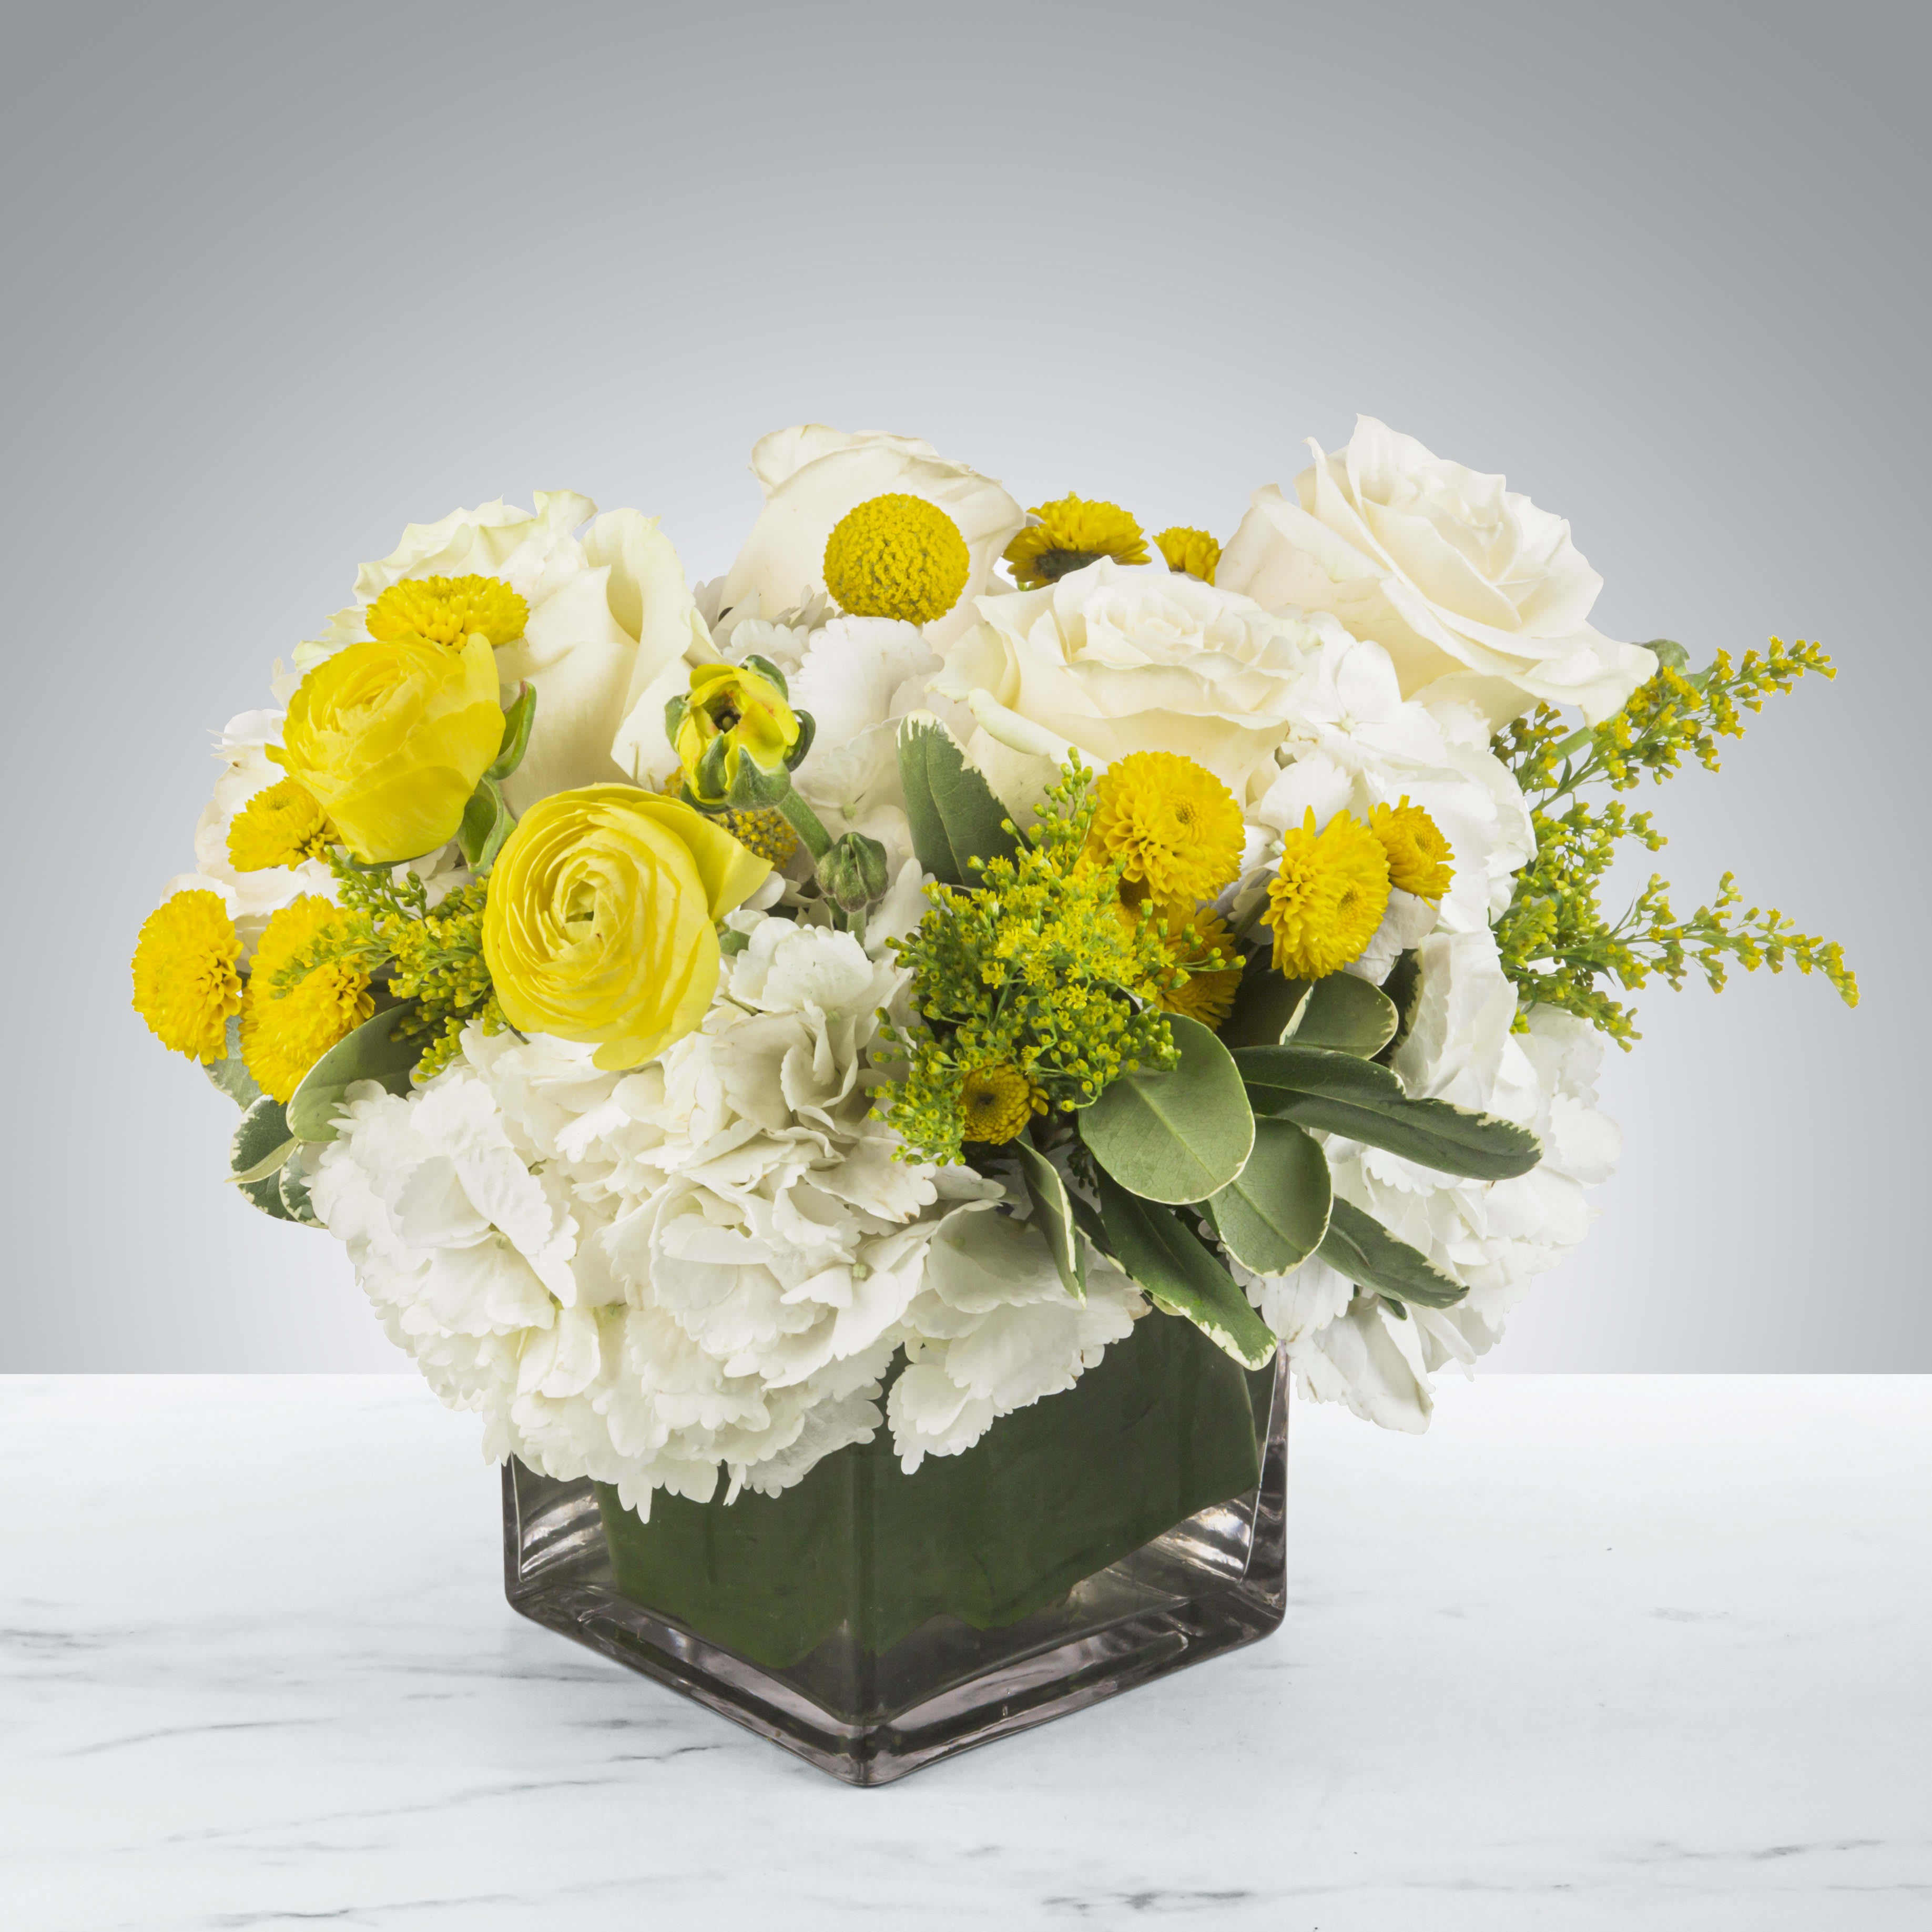 Honeybee by BloomNation™ - This white and yellow arrangement includes cream roses, button mums, and ranunculuses. Honeybee by BloomNation™ is the perfect way to brighten a day! Send a little joy and make somebody feel good. Perfect to send as a get well soon present or just because!   APPROXIMATE DIMENSIONS 12&quot; W X 12&quot; H